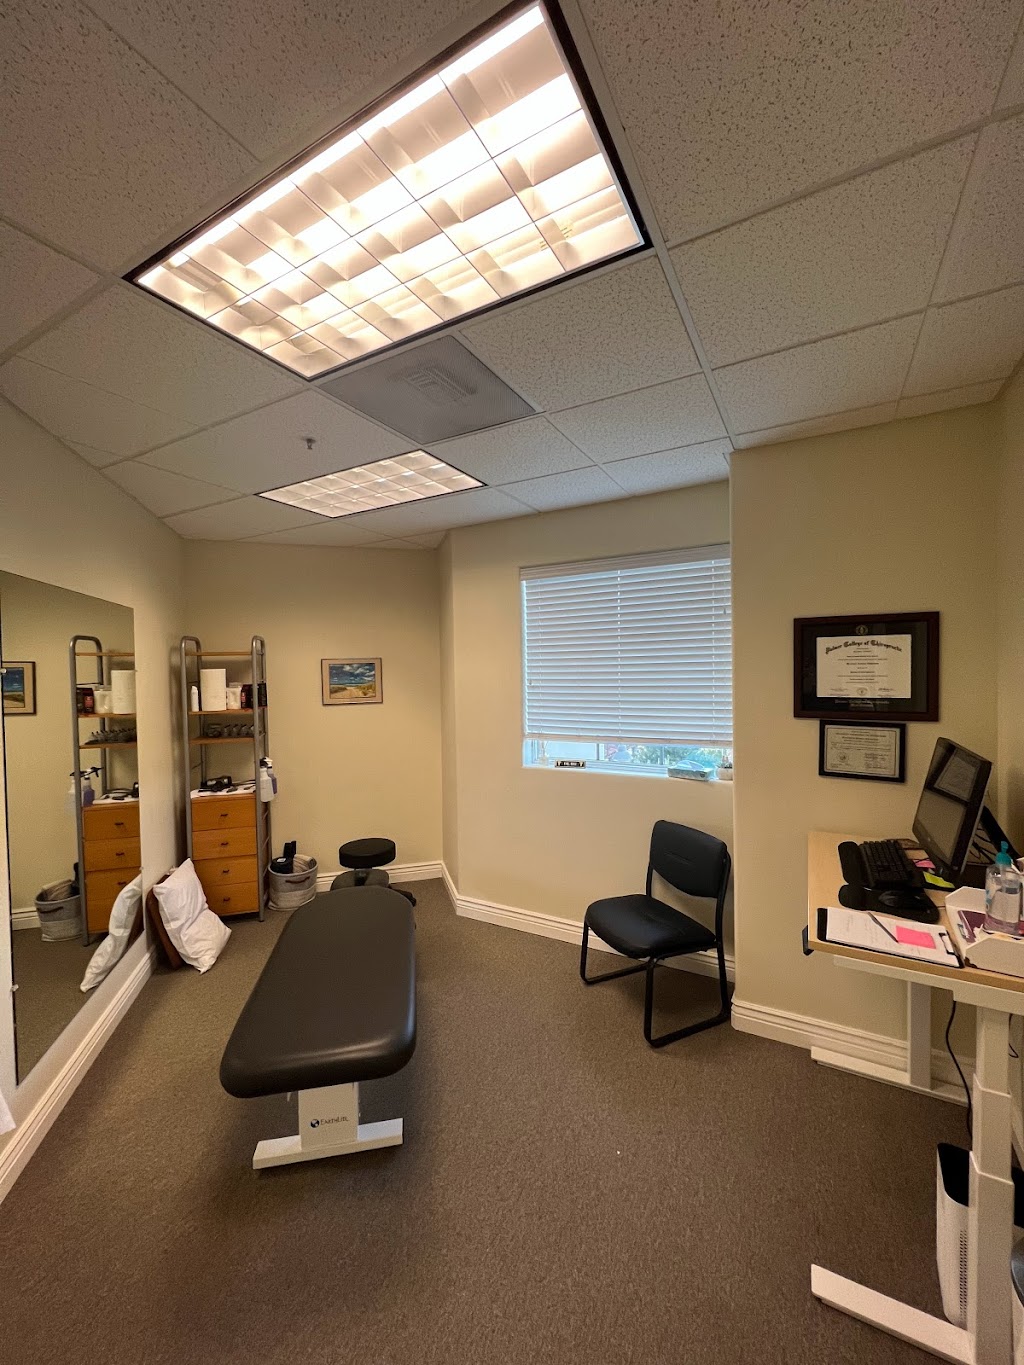 Active Spinal & Sports Care, Inc. | 18525 Sutter Blvd # 200, Morgan Hill, CA 95037 | Phone: (408) 779-3565